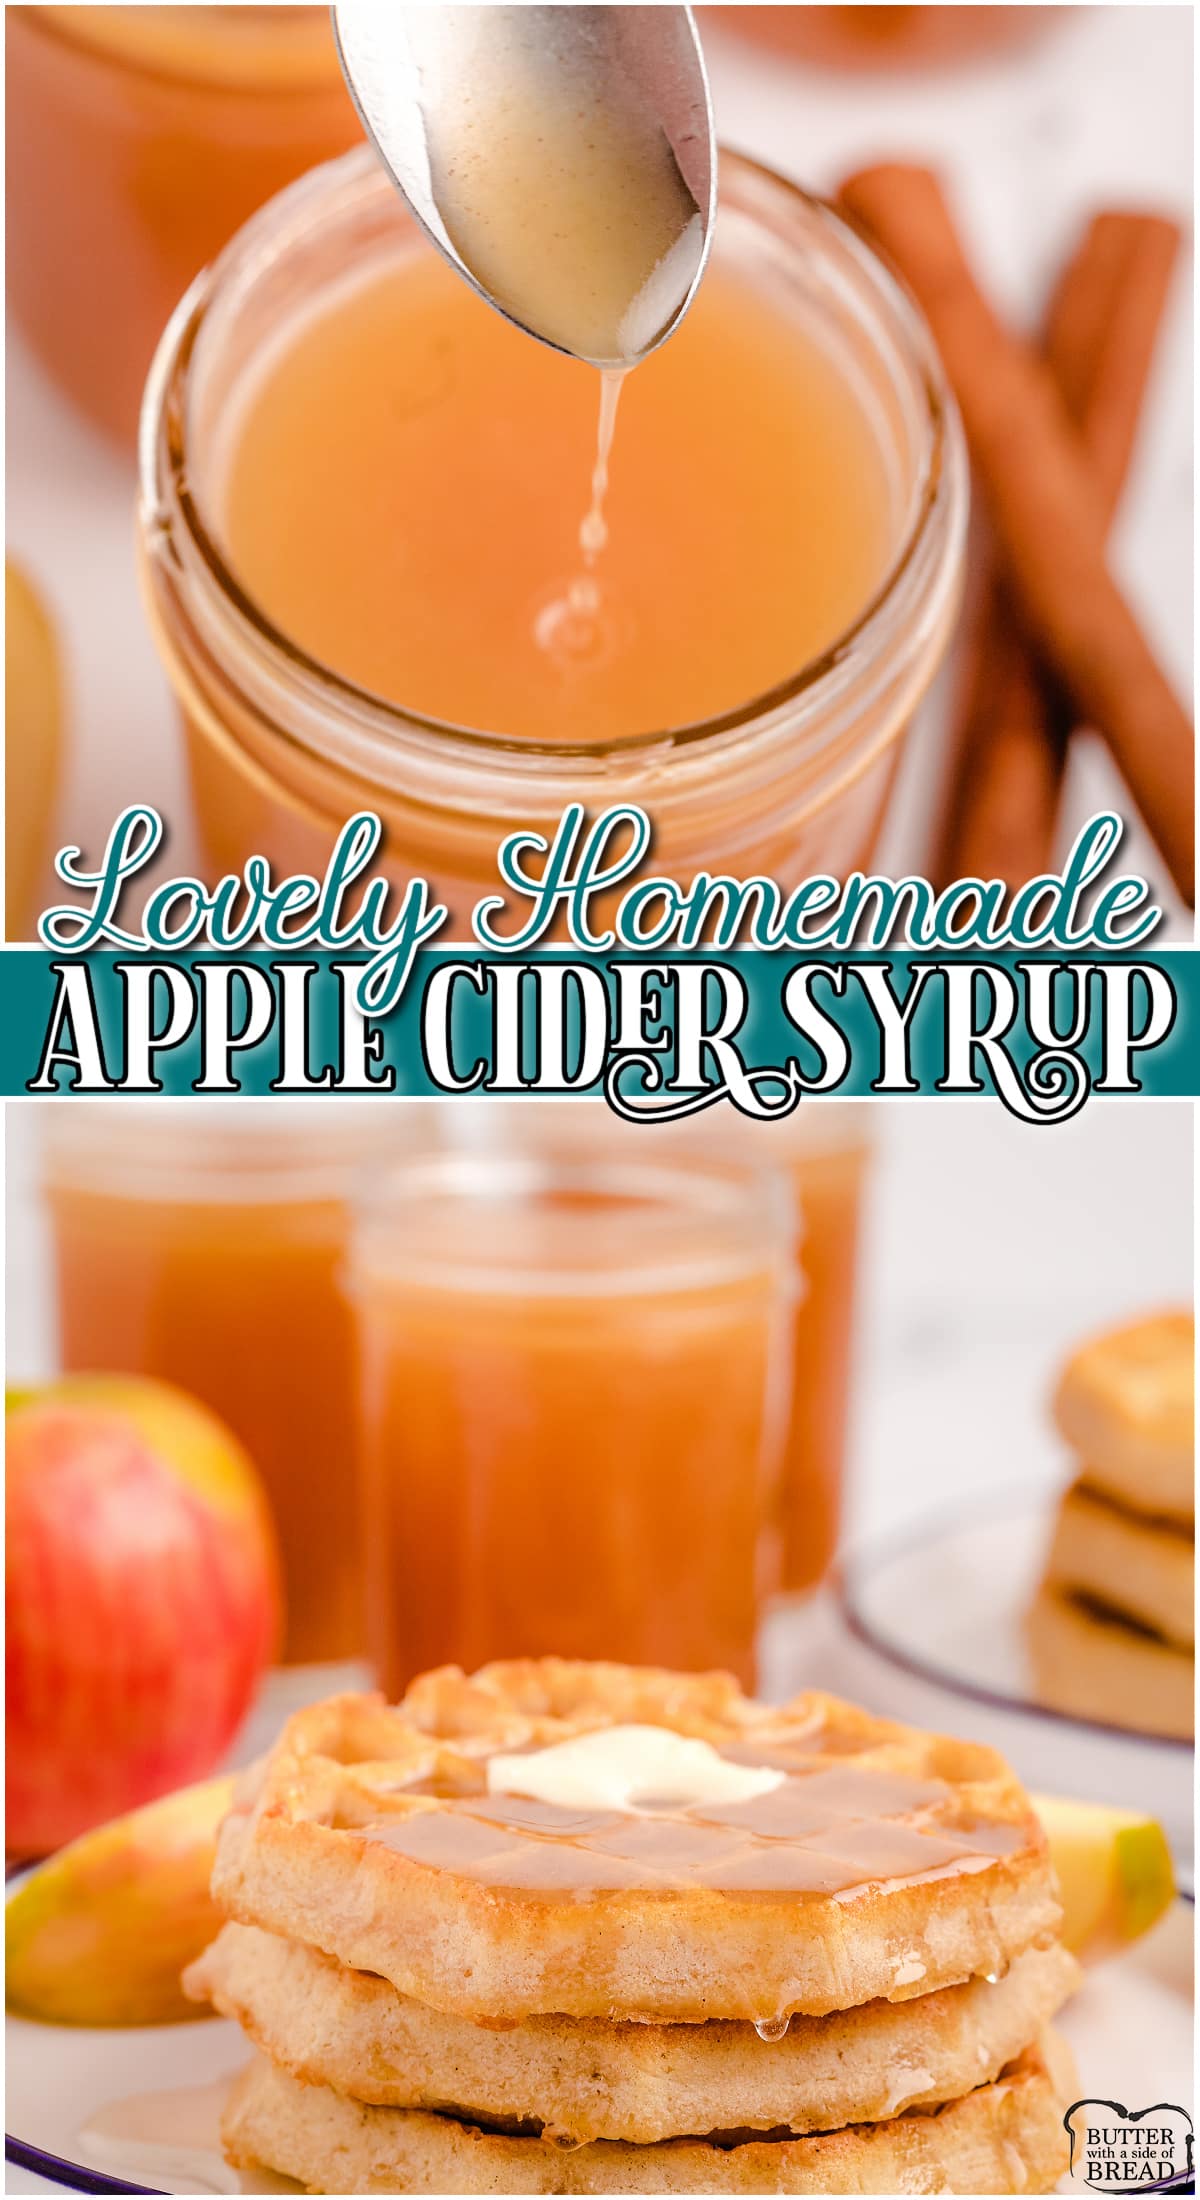 Apple Cider Syrup Recipe is made with just 6 simple ingredients and has fantastic bright, fresh apple flavor! Make this spiced syrup made with apple cider for a decadent Fall treat!